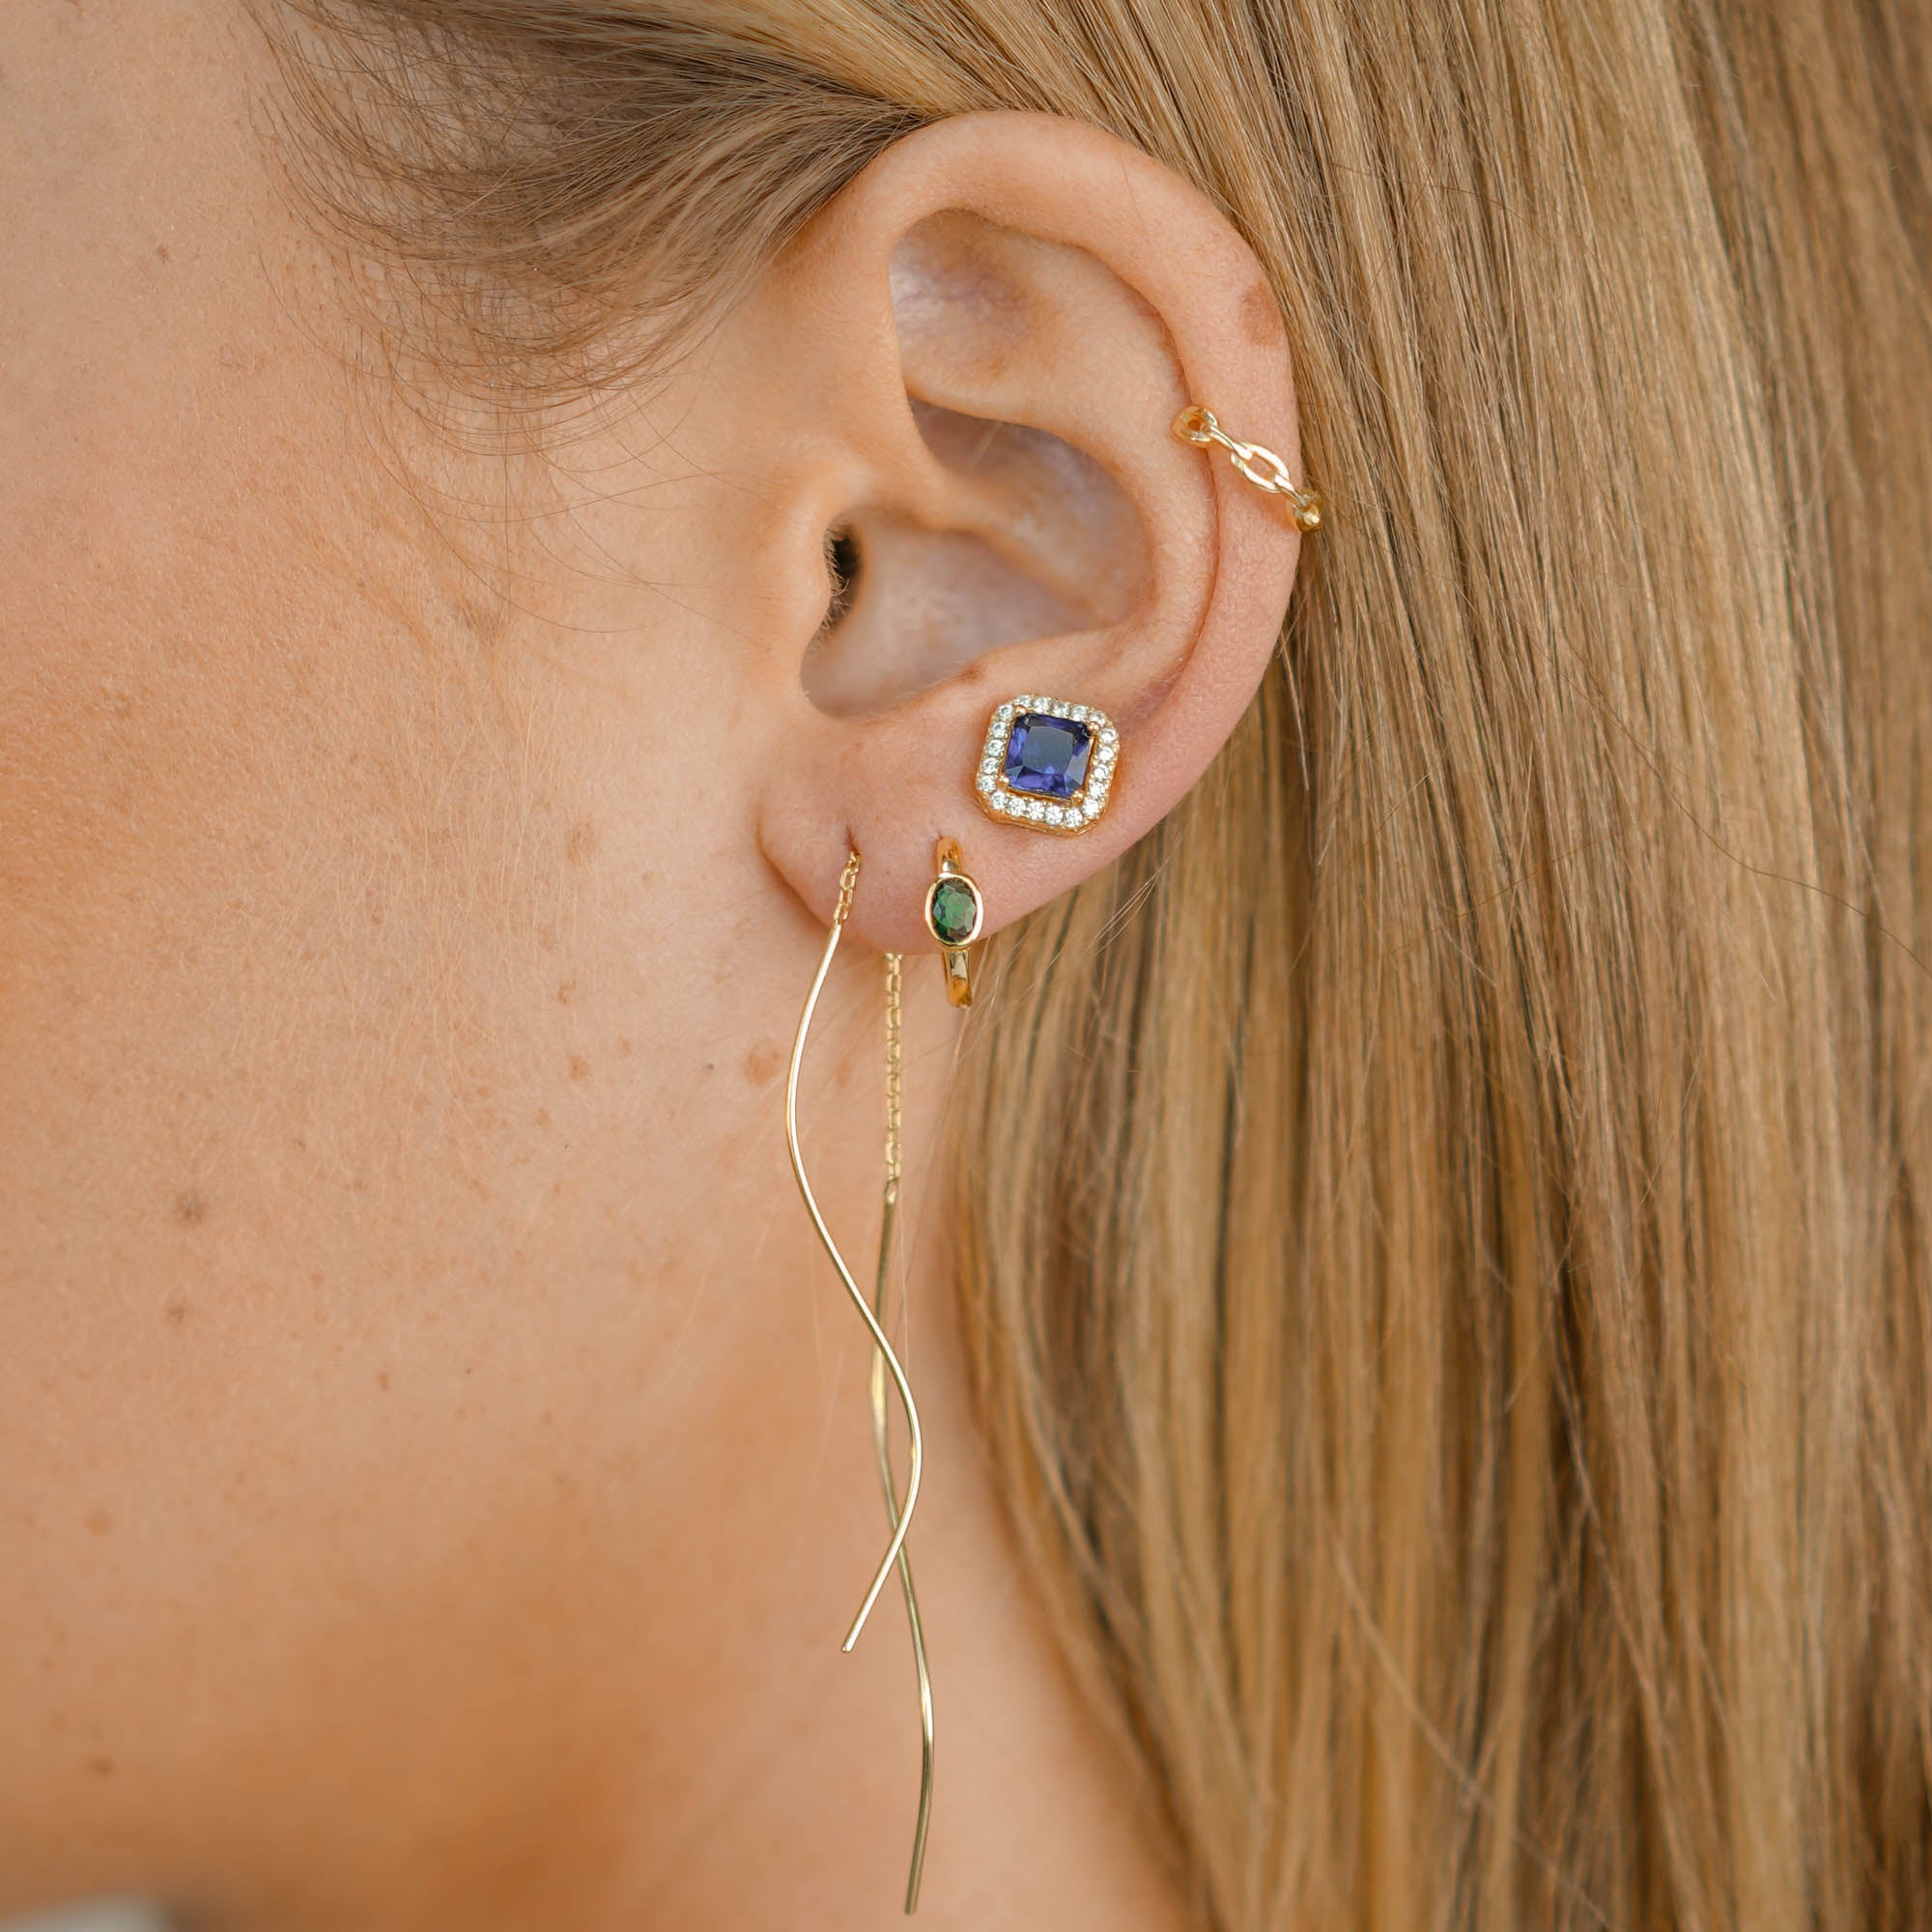 Blue Sapphire Square Pave Halo Stud Earrings